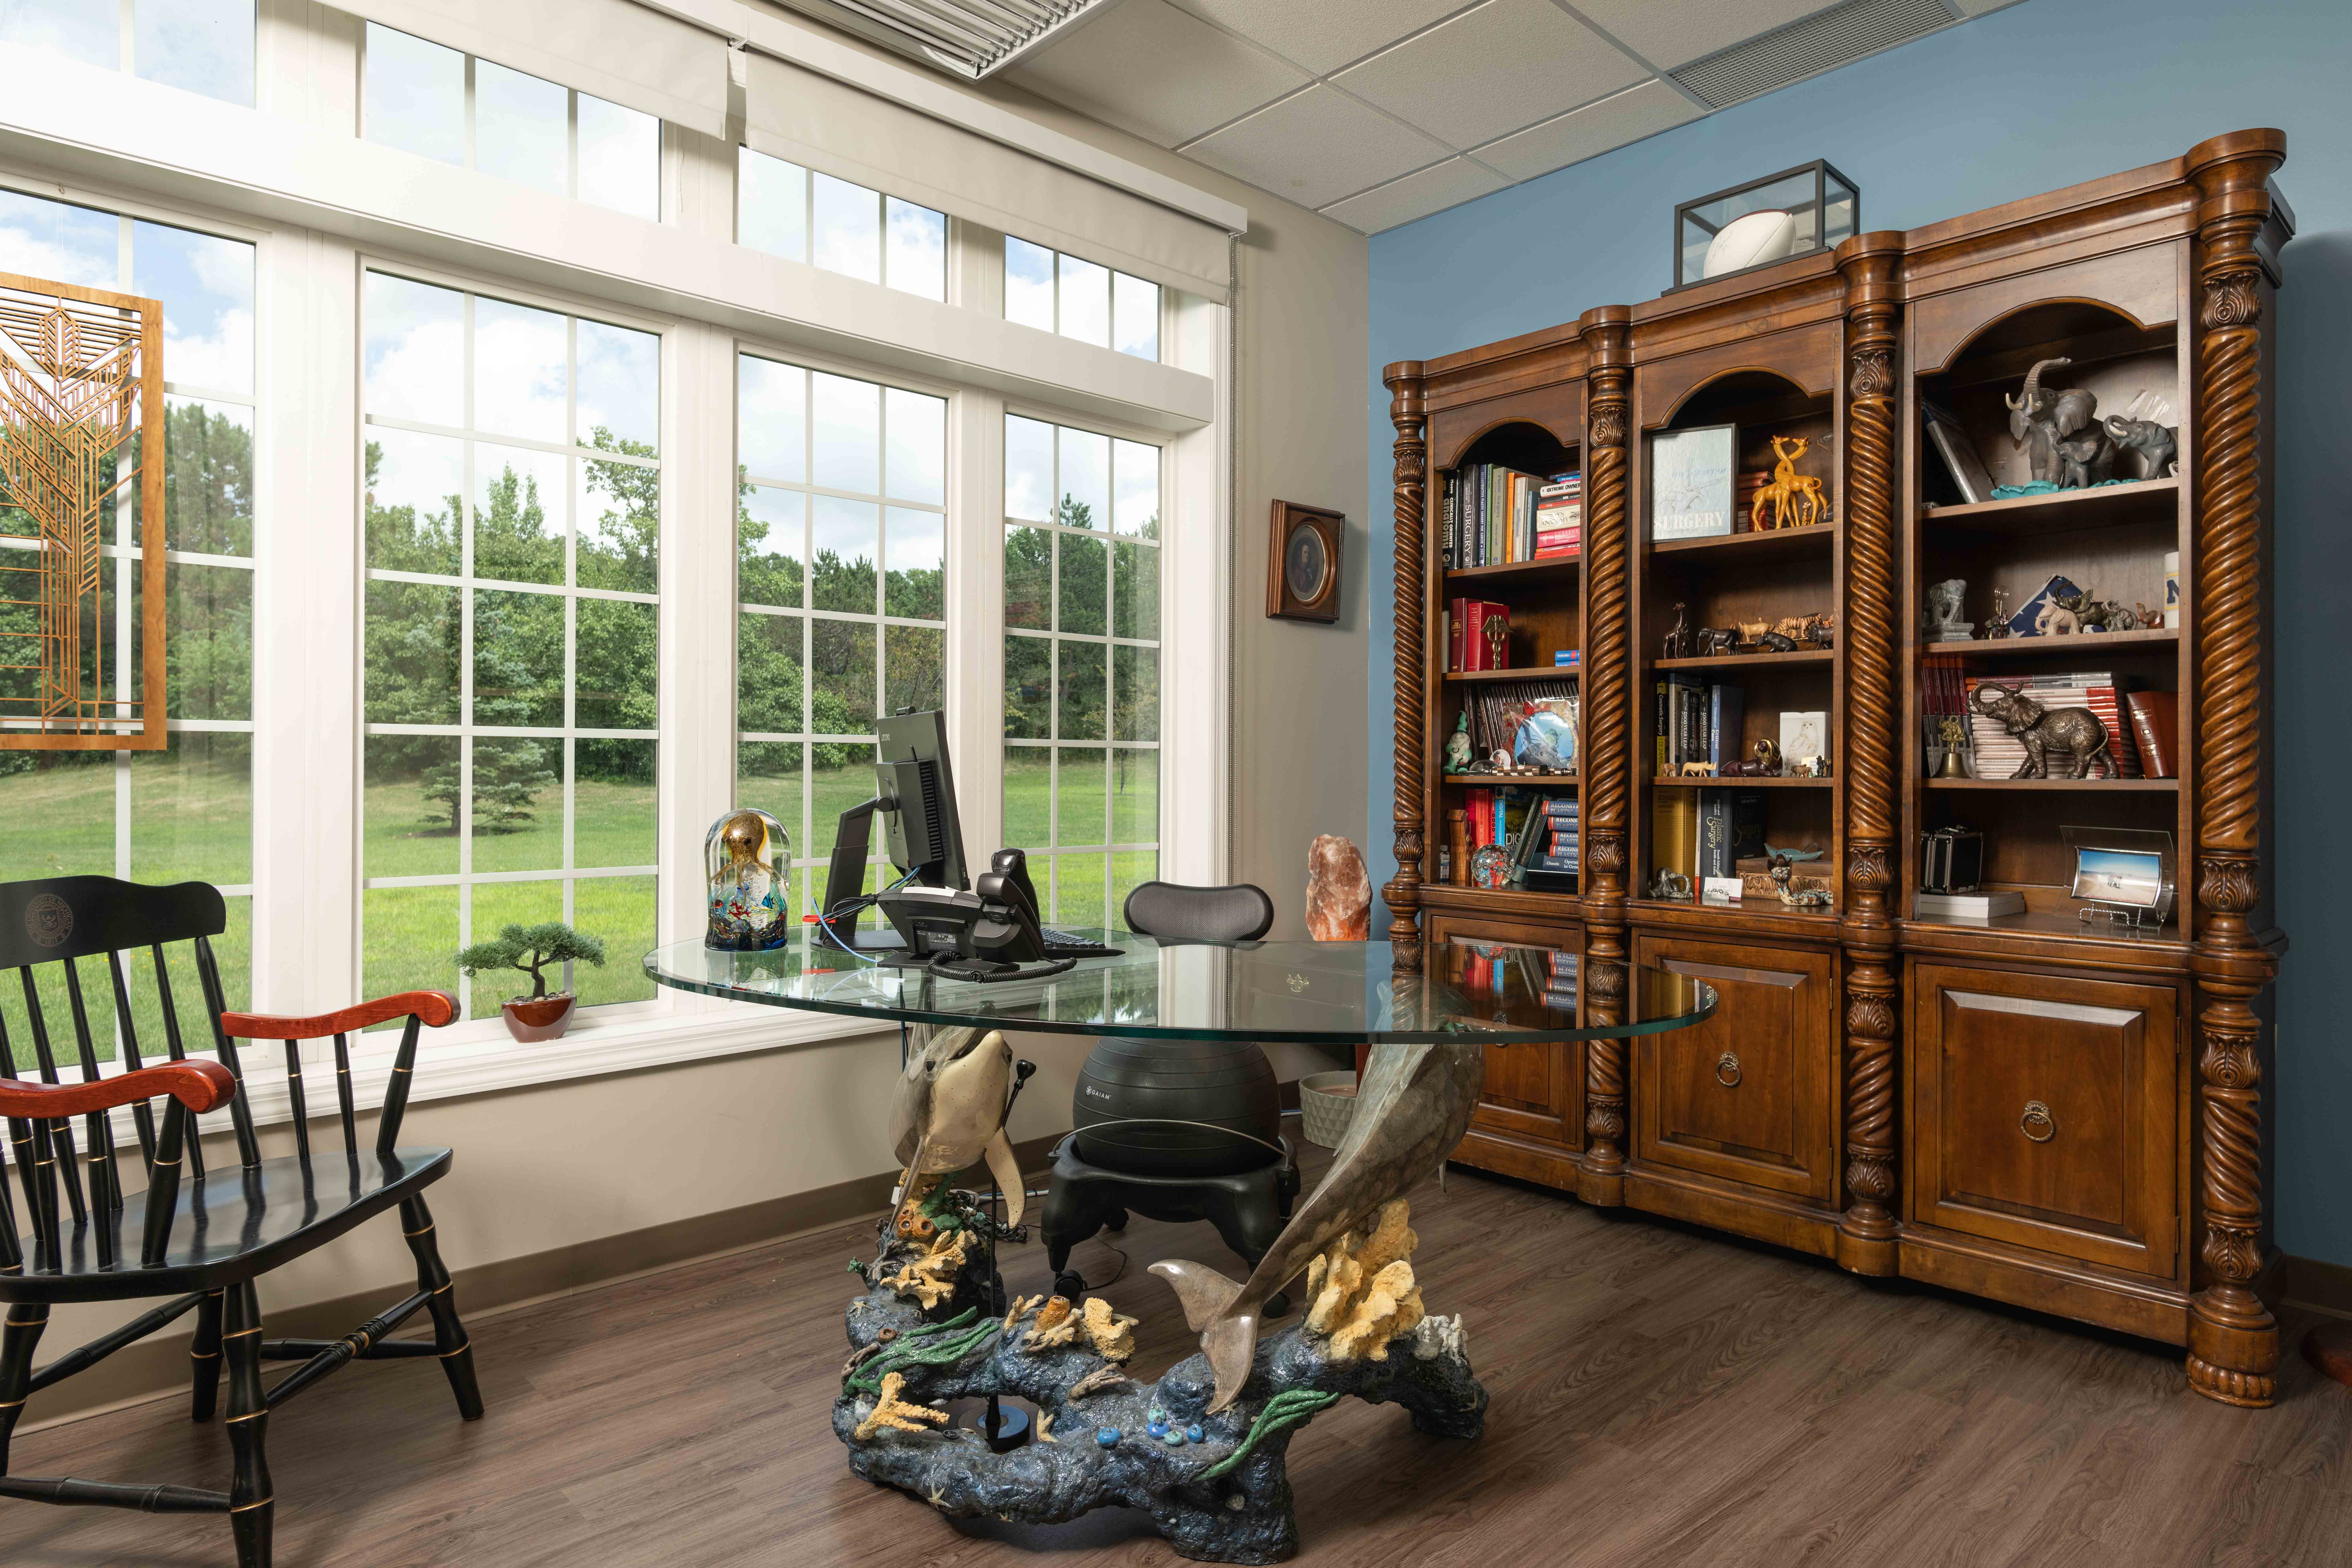 Office with an ocean-themed desk, large bay windows, and a bookshelf with elephant trinkets